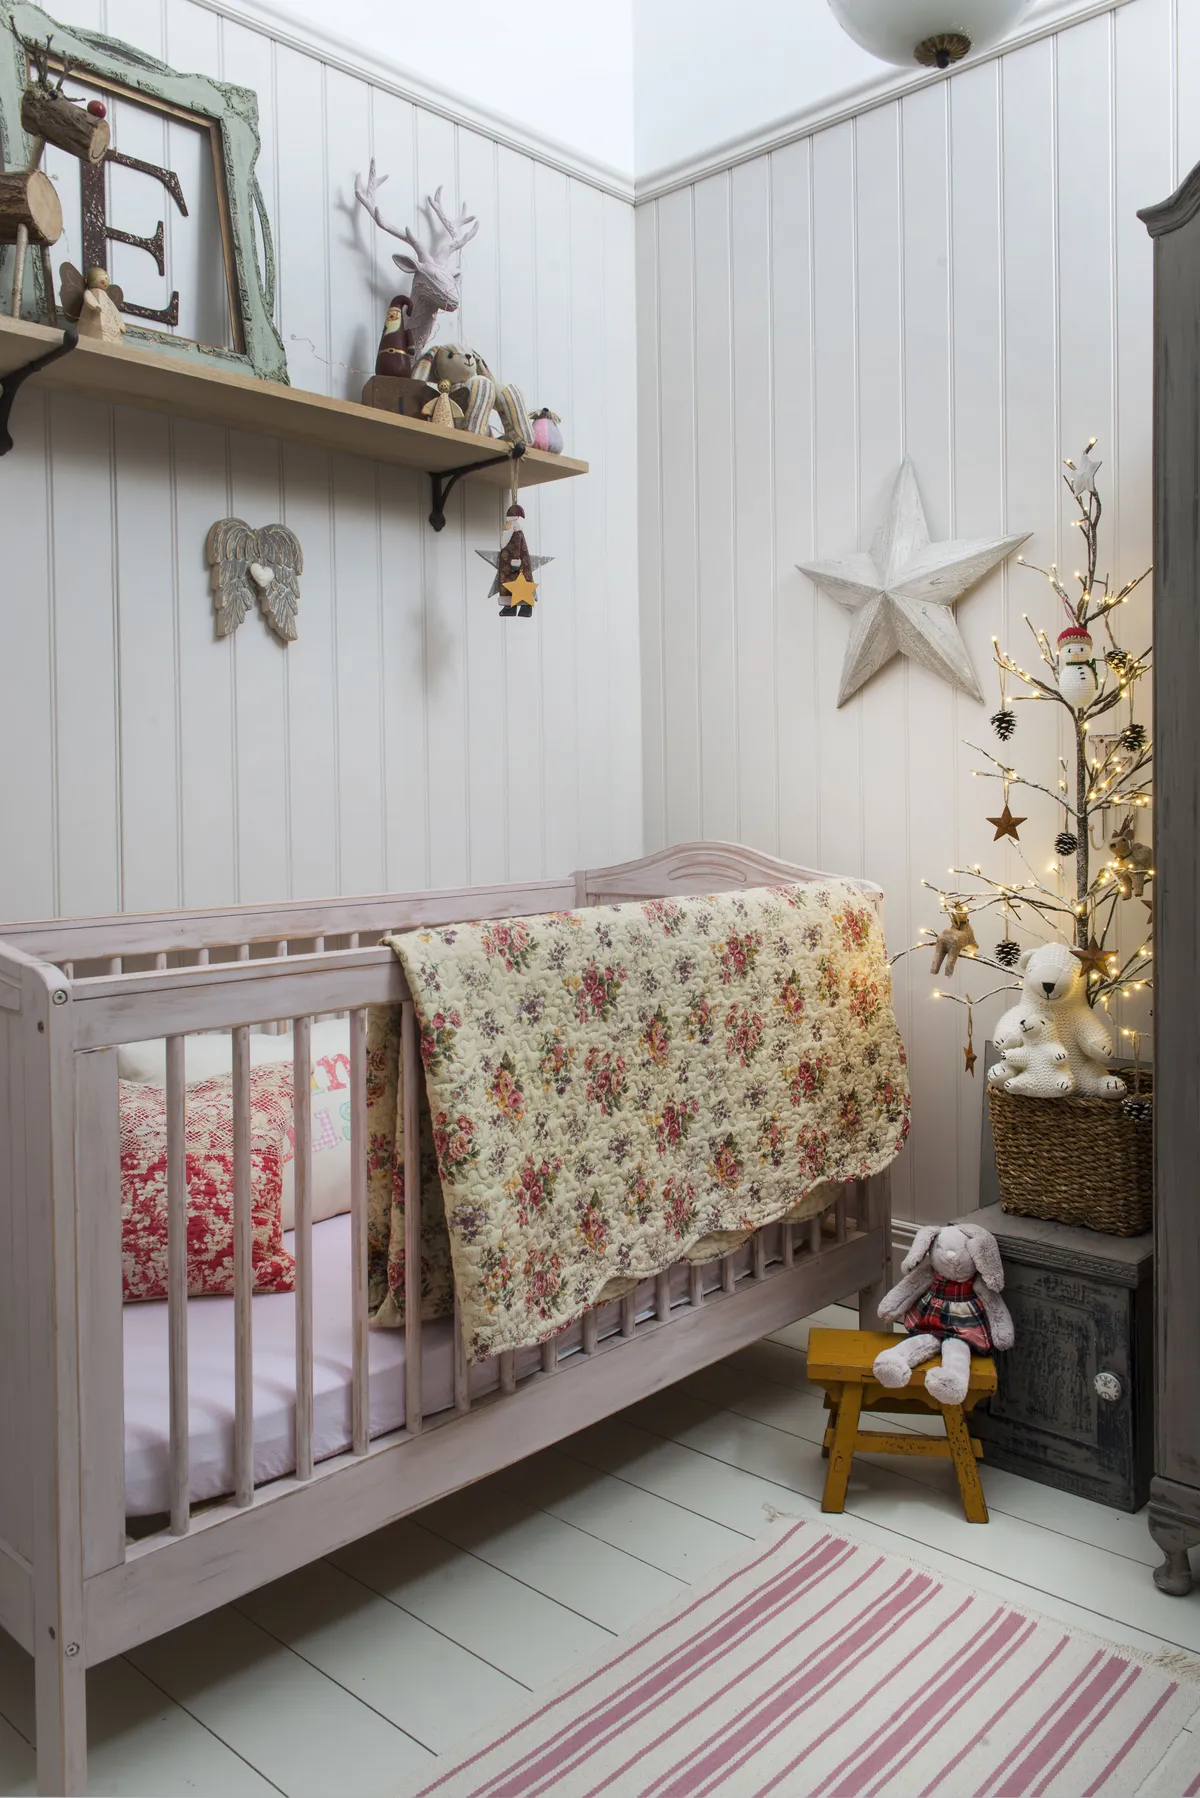 Kay and Paul created a bedroom for their granddaughter, Evie, and it looks particularly magical with a touch of festive sparkle. ‘The cot was a bargain from Gumtree, which I painted in Annie Sloan’s non- toxic Antoinette chalk paint,’ says Kay. ‘The floral throw is also vintage’